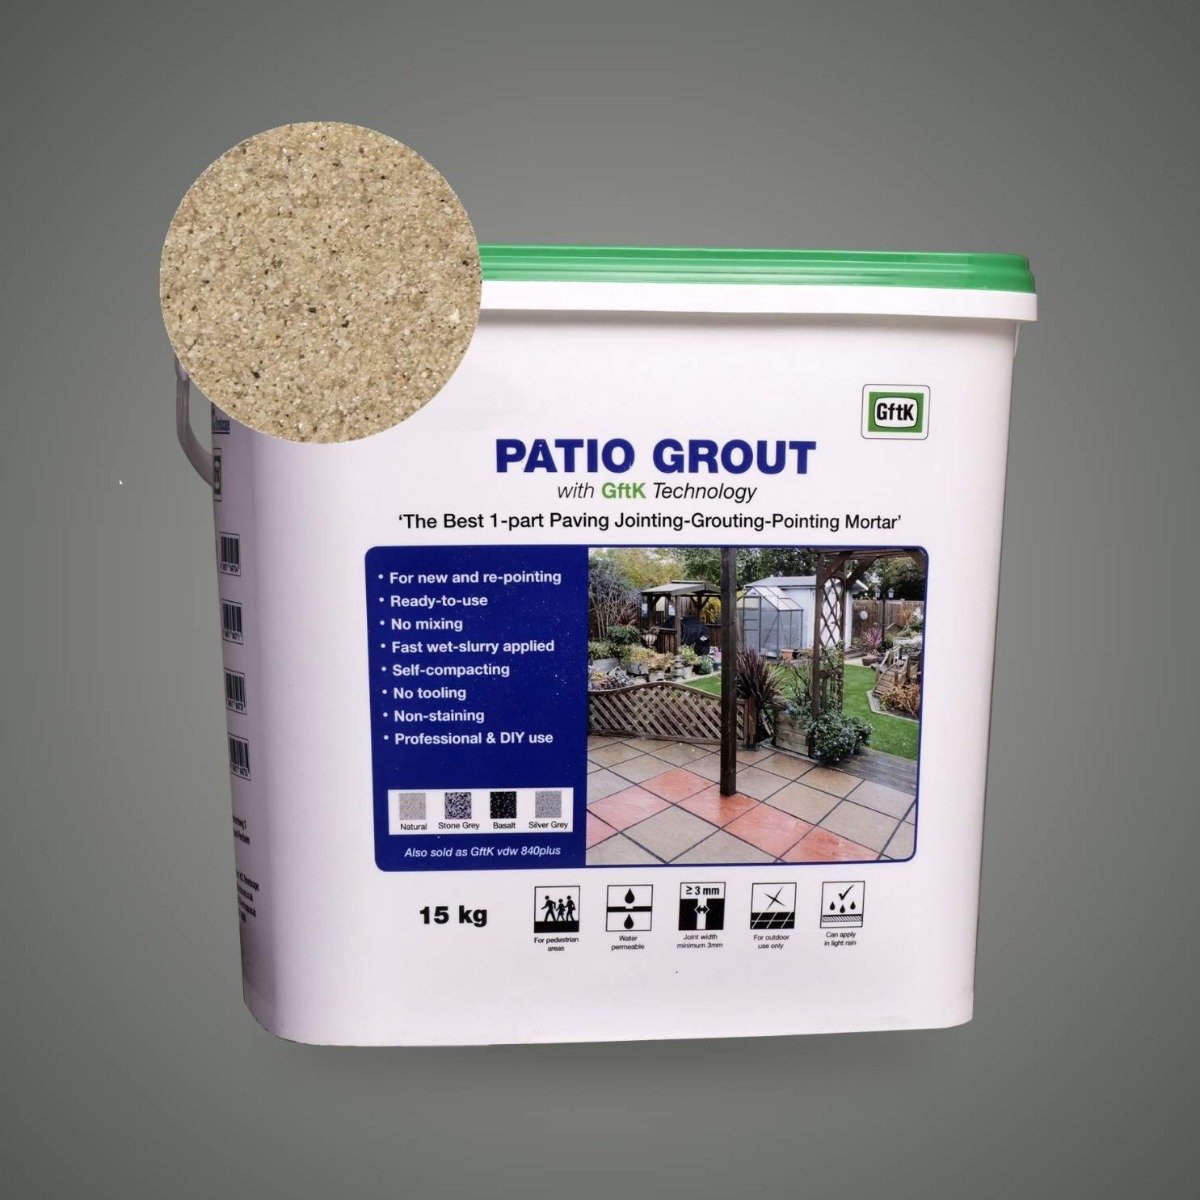 GftK_Patio Grout, 15kg-Brush In, ideal for DIYers-Natural